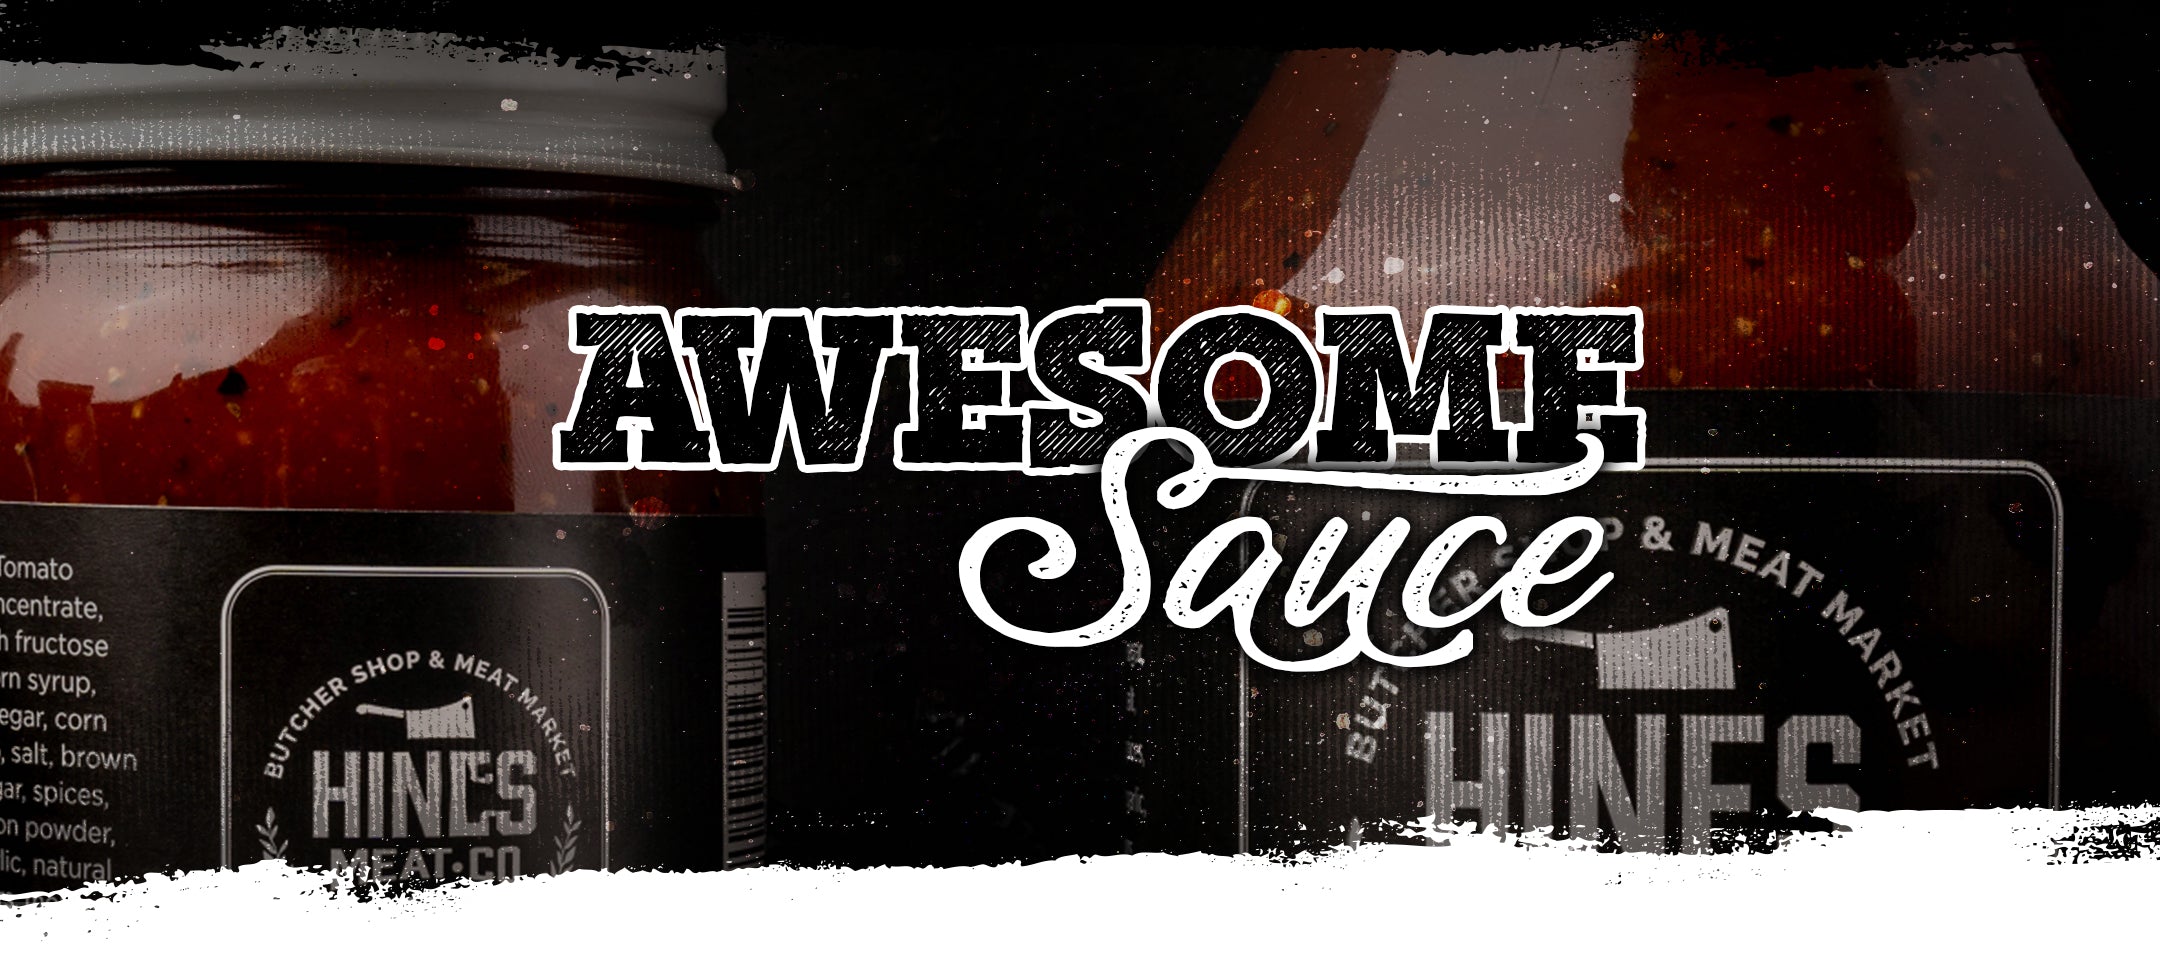 HINES MEAT CO Sauces